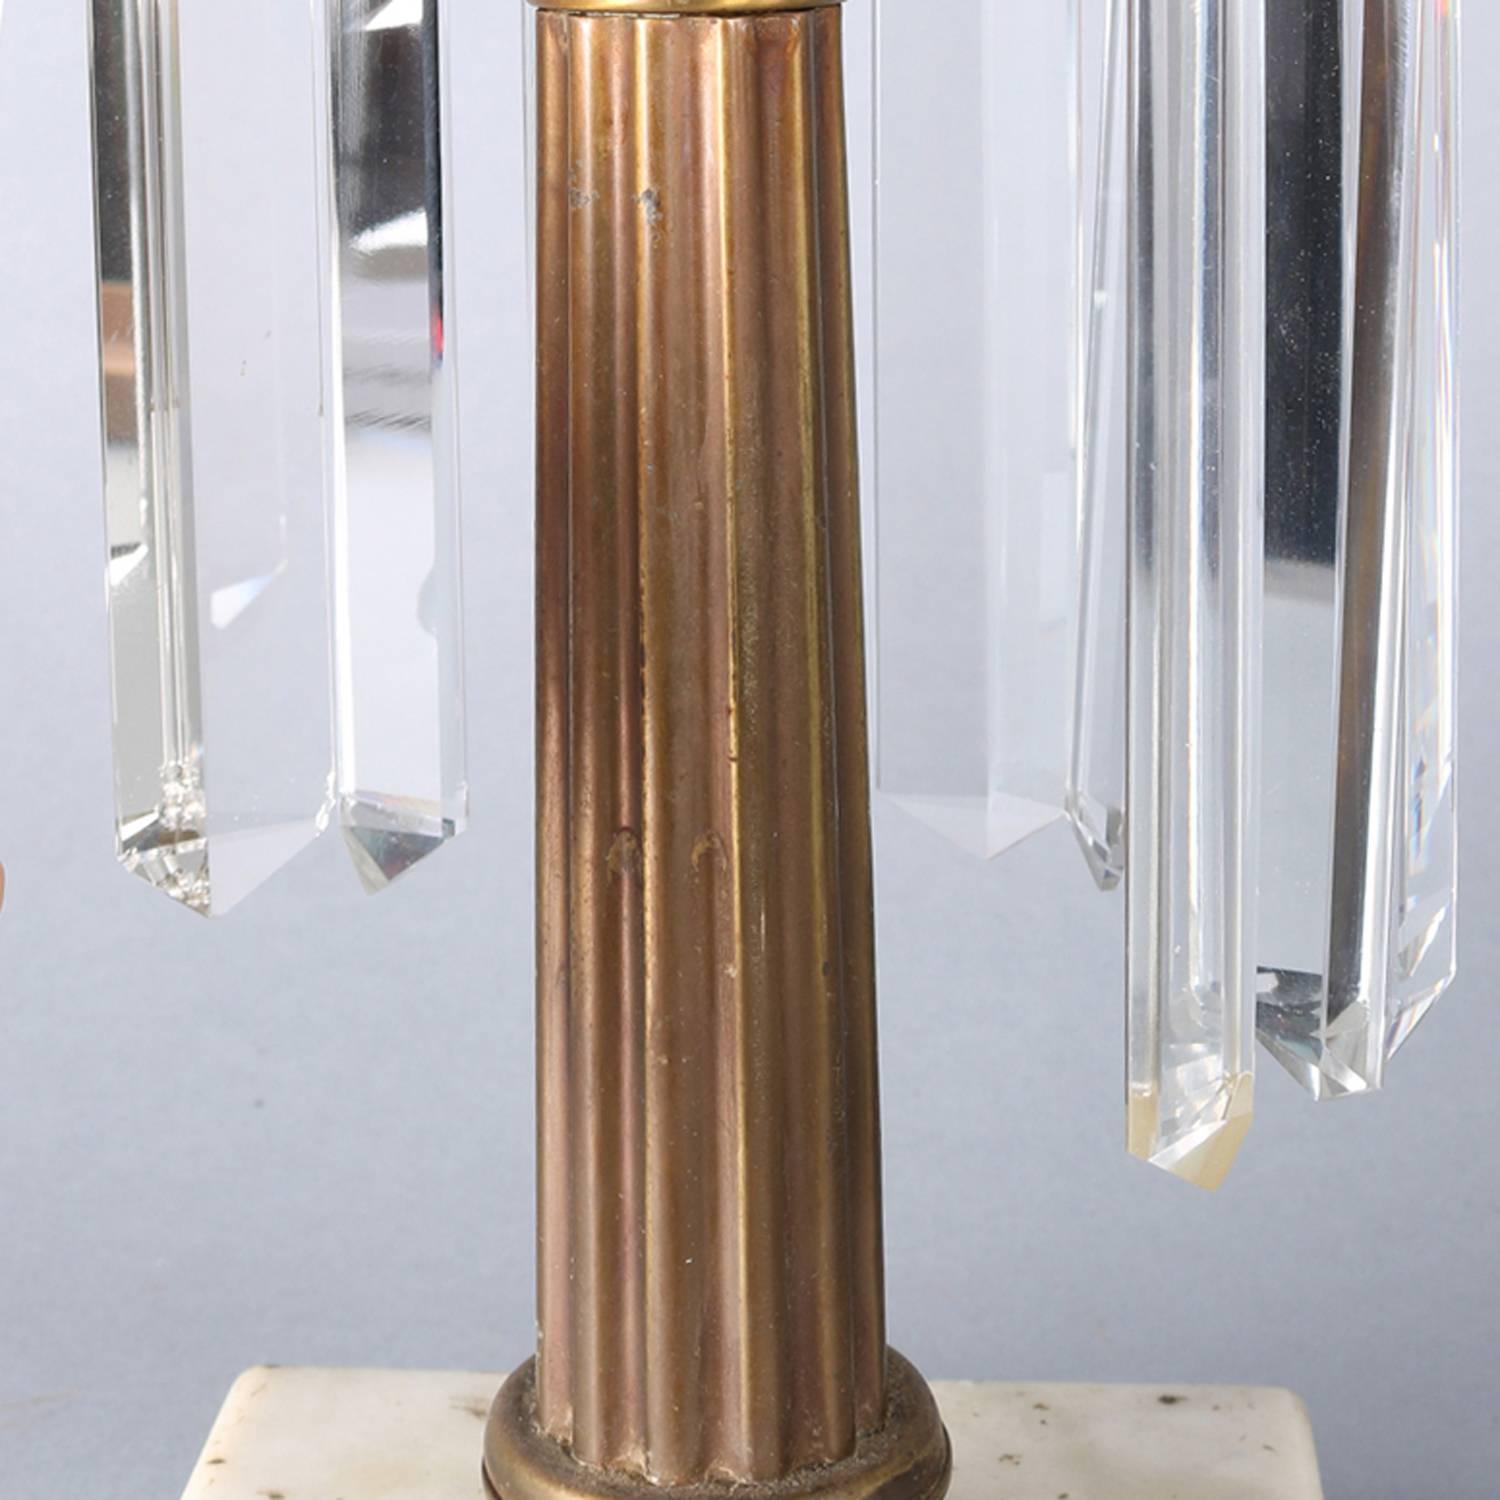 American Antique Gilt, Marble and Crystal Electrified Solar Lamp, 19th Century